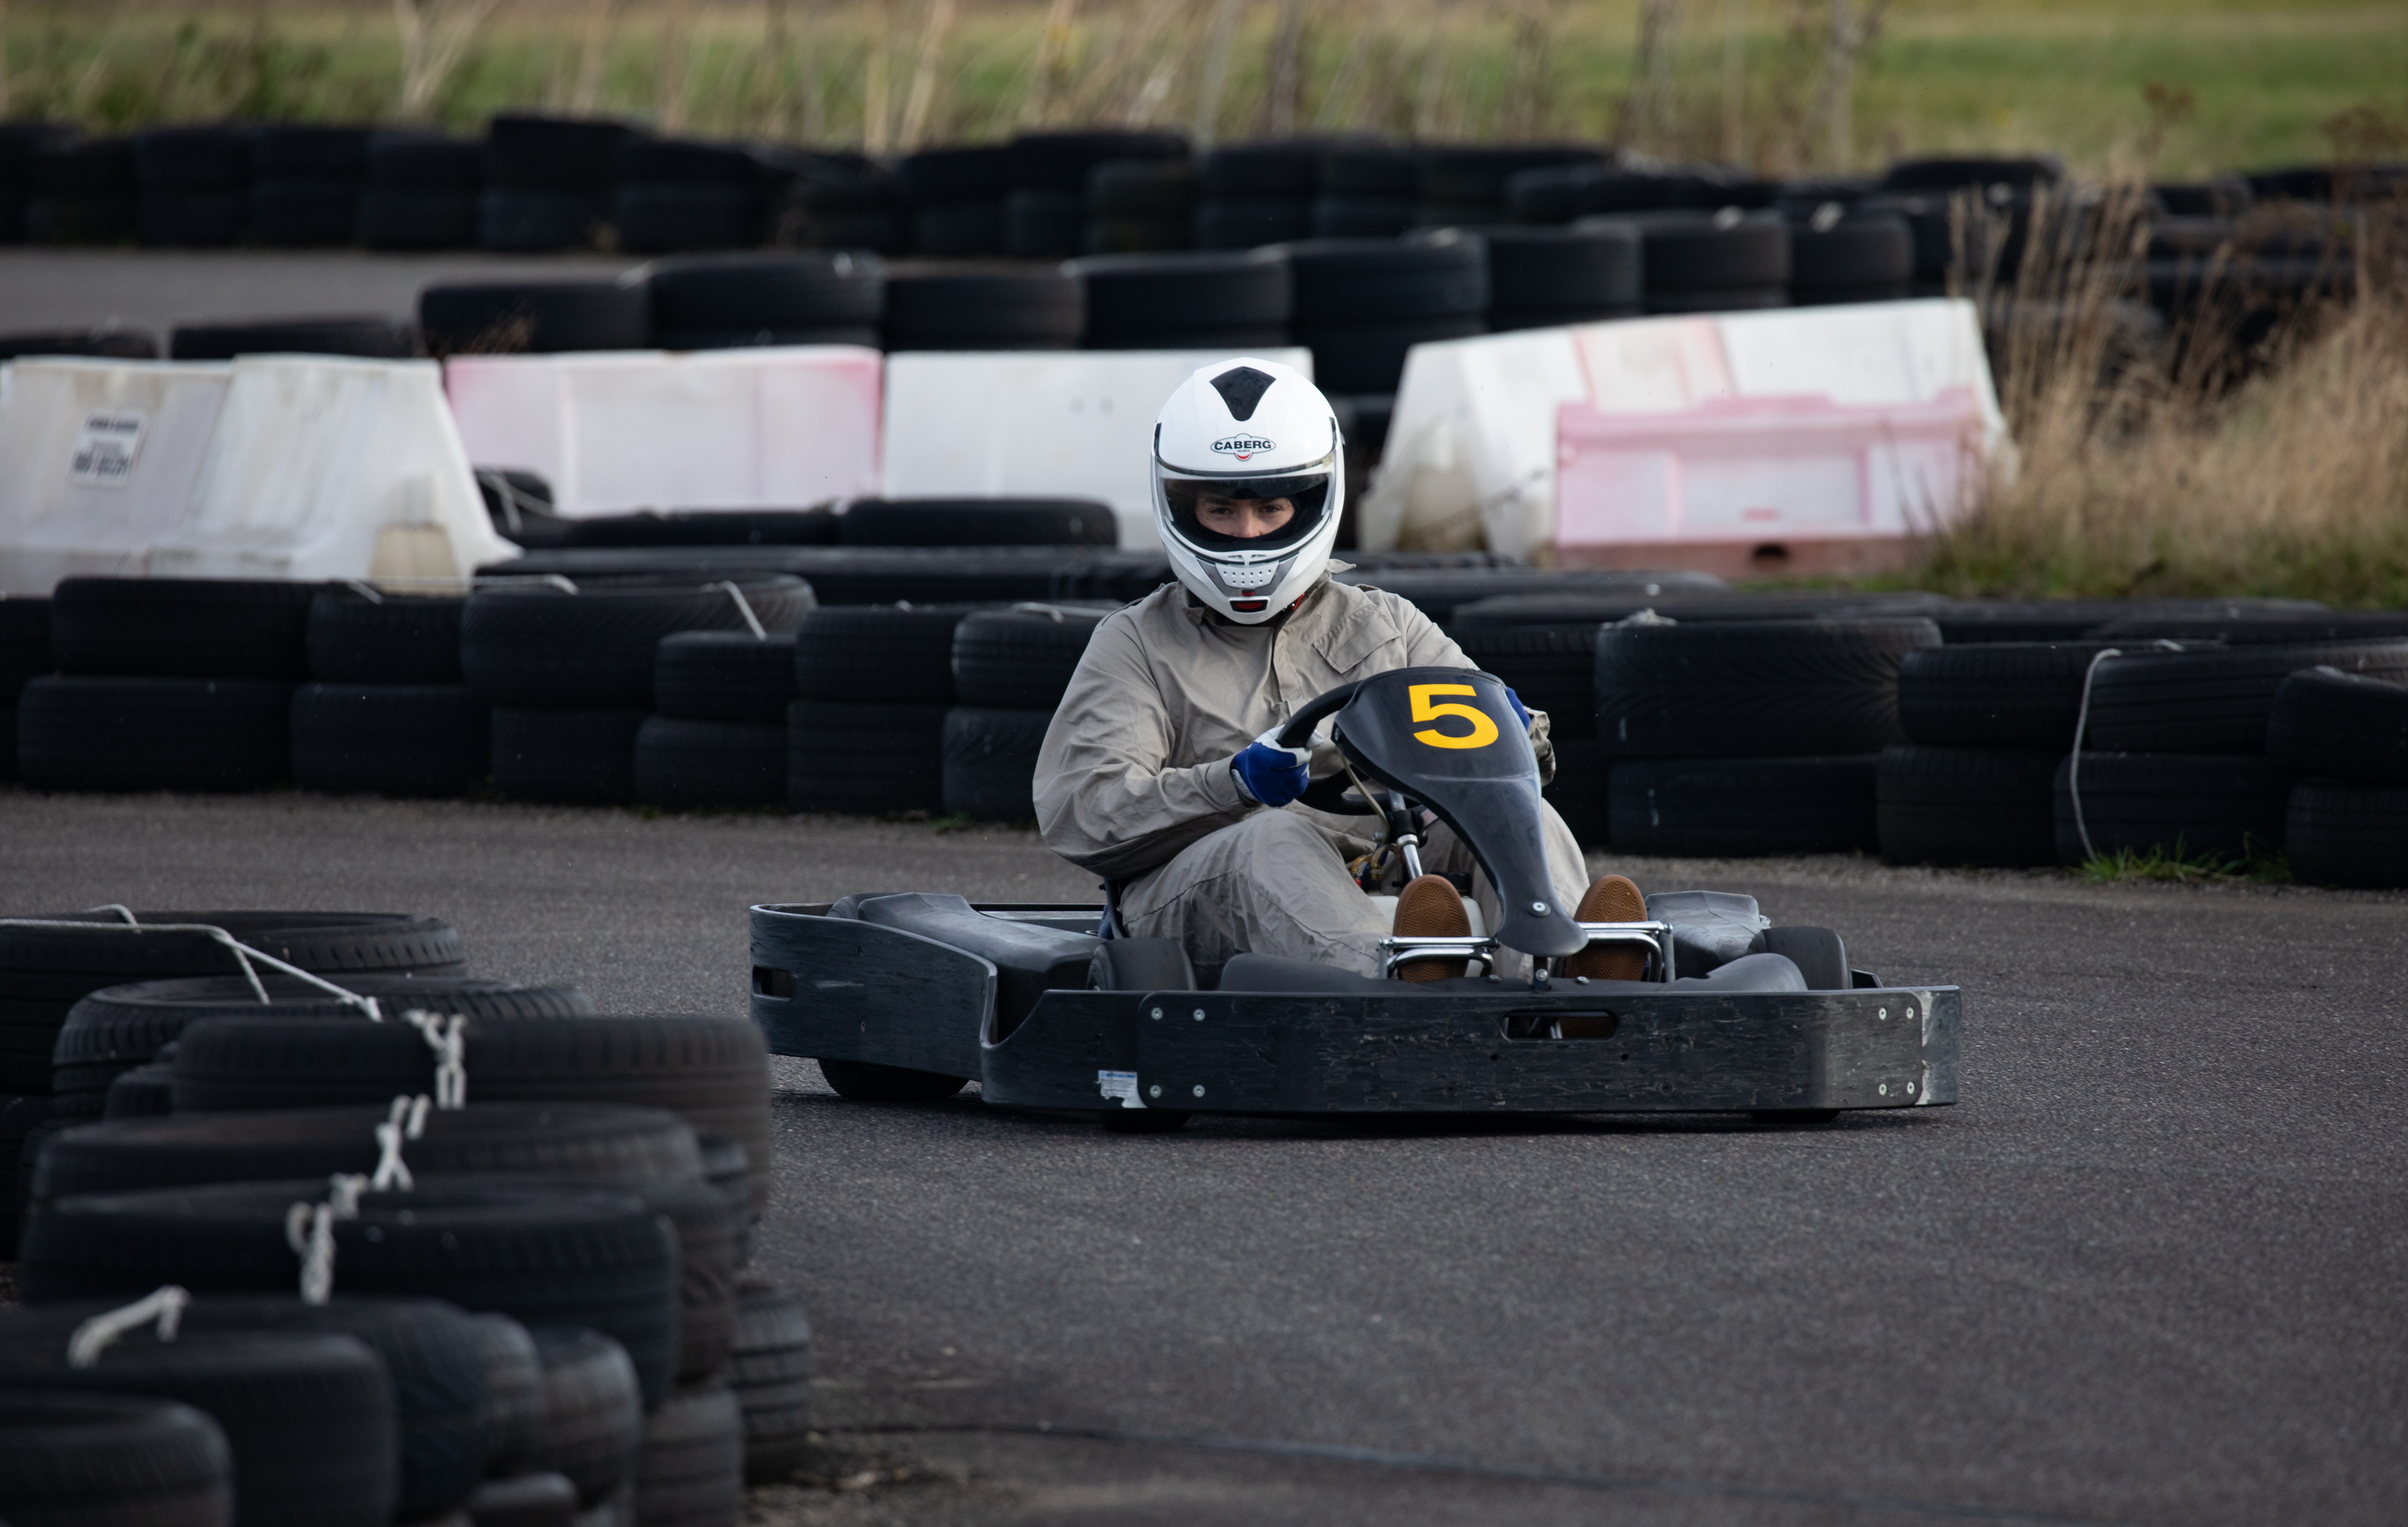 Karting at the RAFMSA open day at RAF Wittering